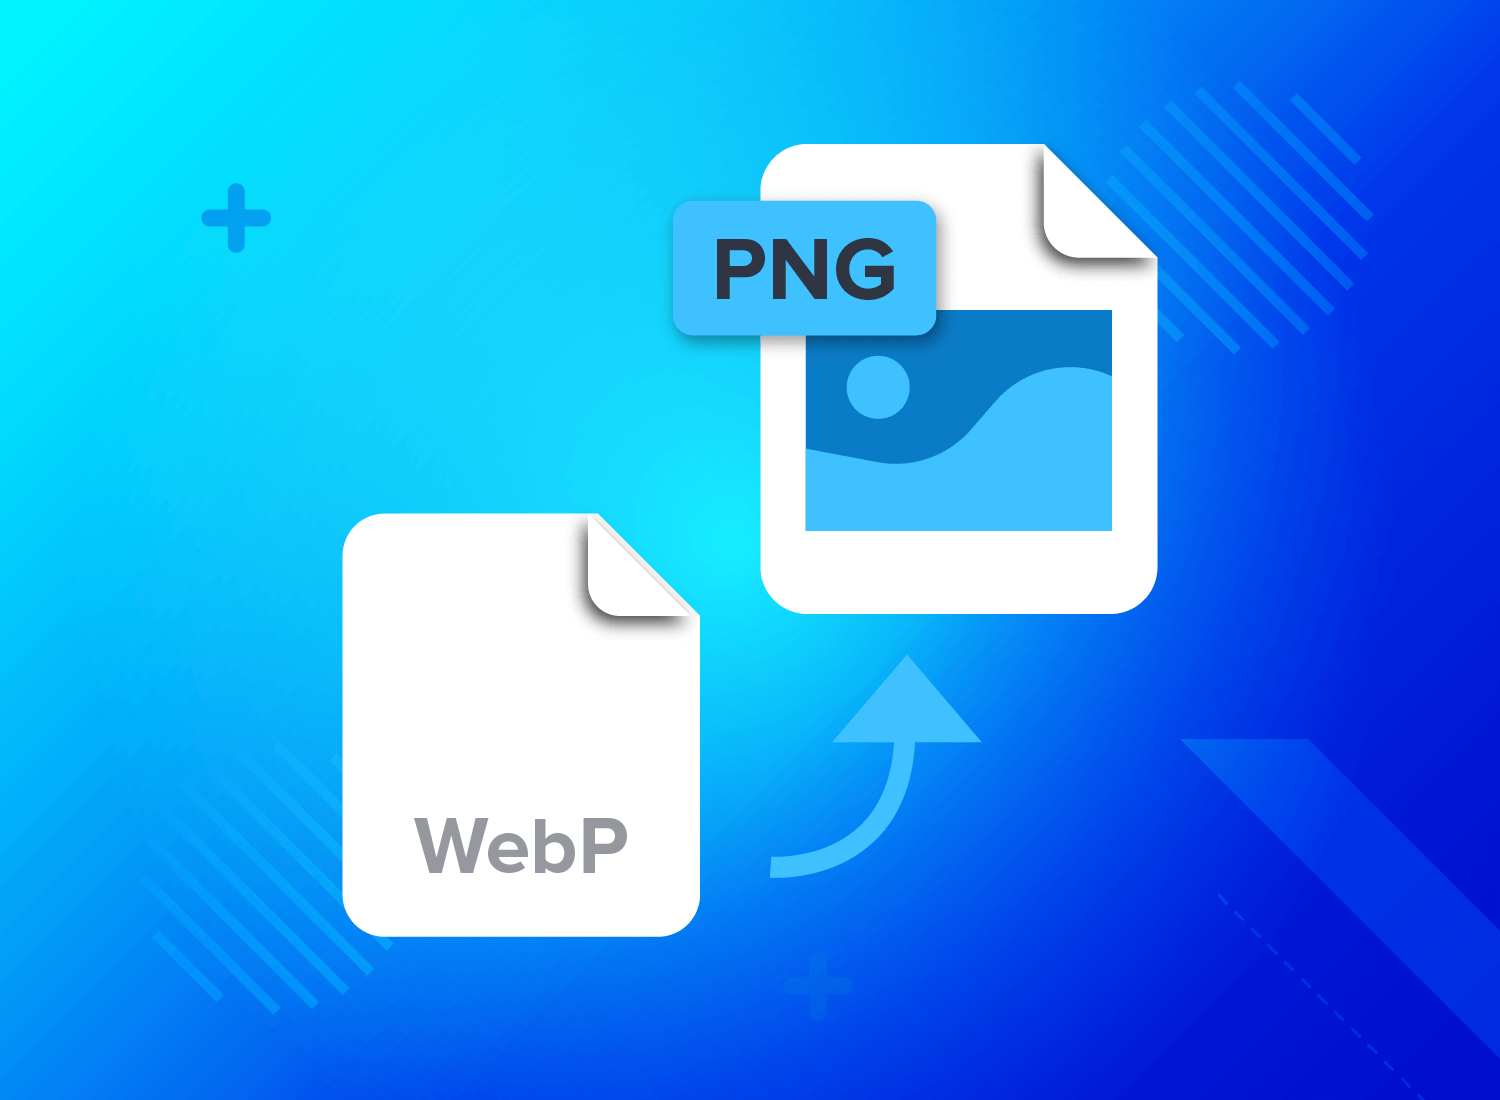 Converting WebP to PNG